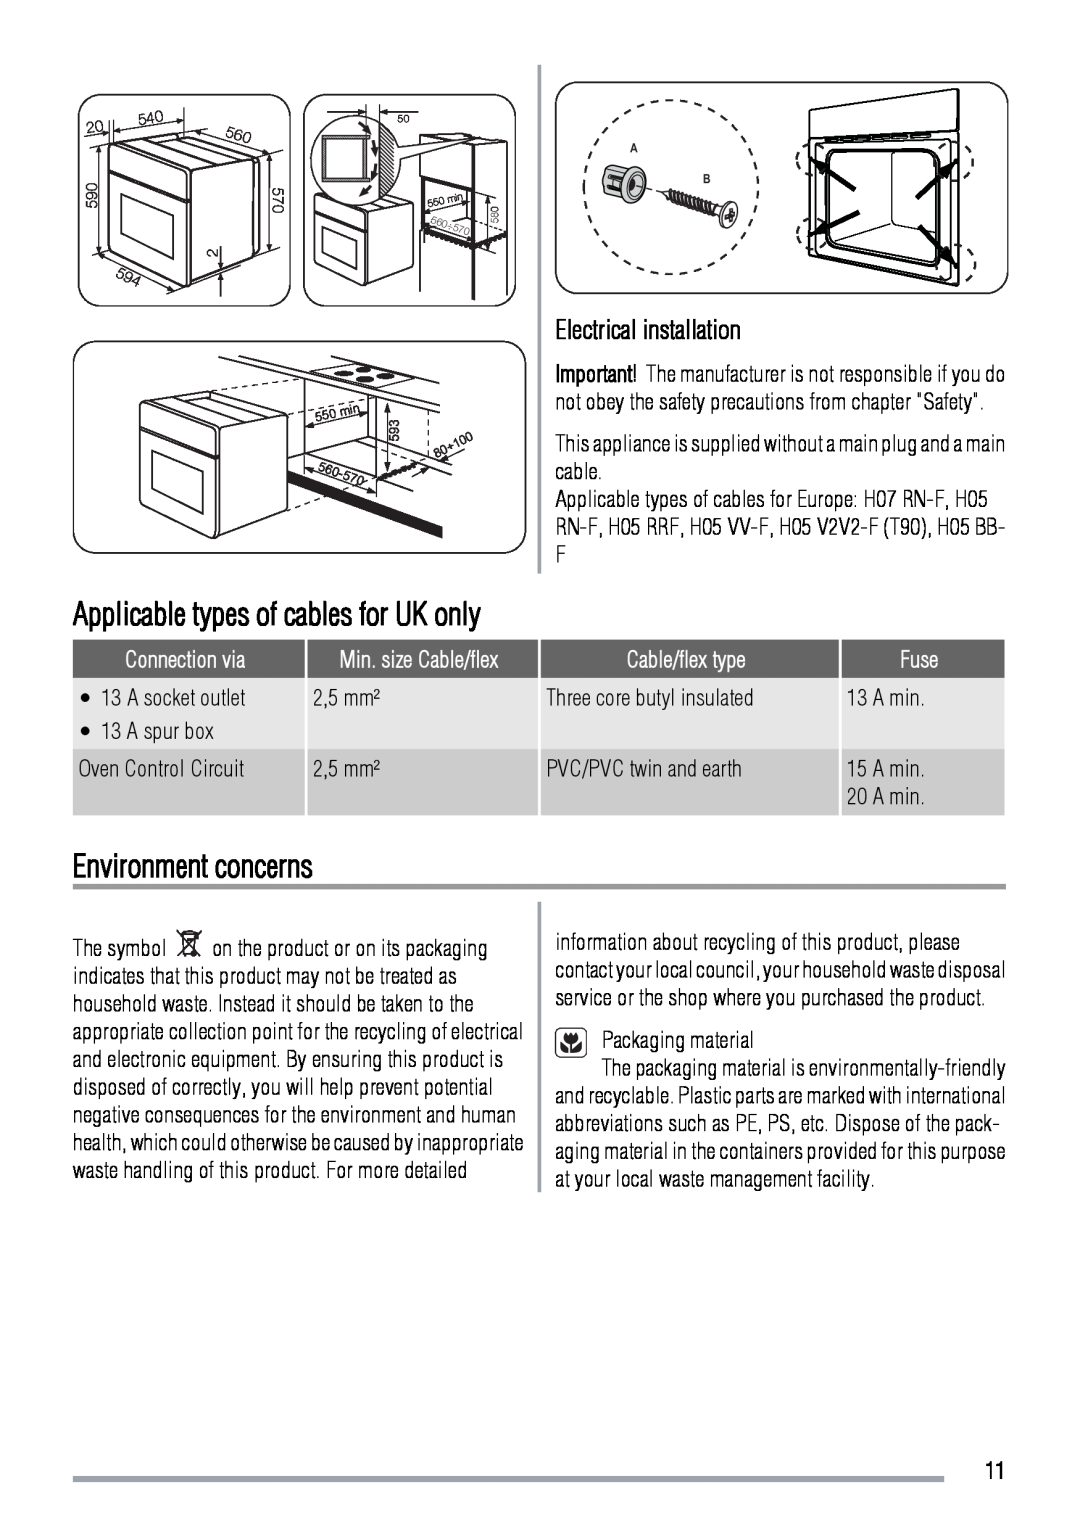 Zanussi ZOB142 user manual Environment concerns, Electrical installation, Applicable types of cables for UK only 